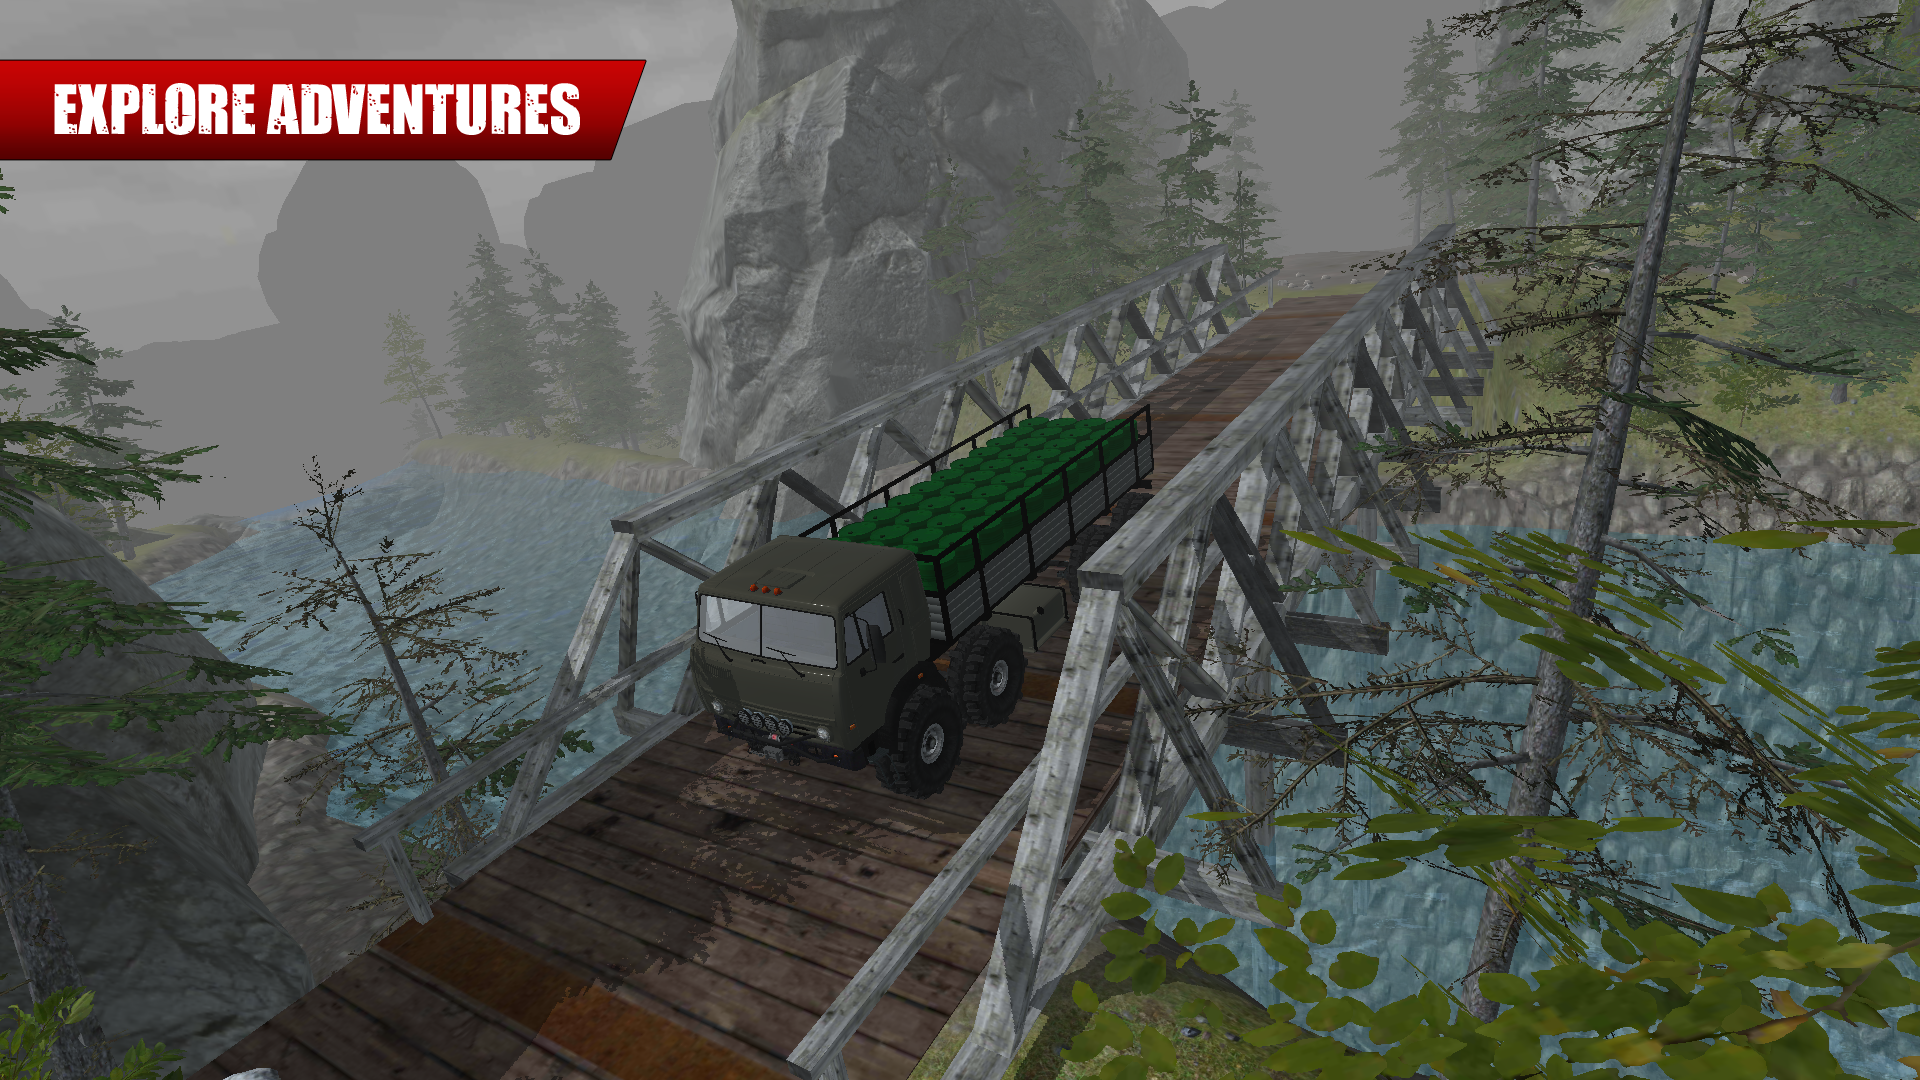 truck driver offroad simulator gameplay image